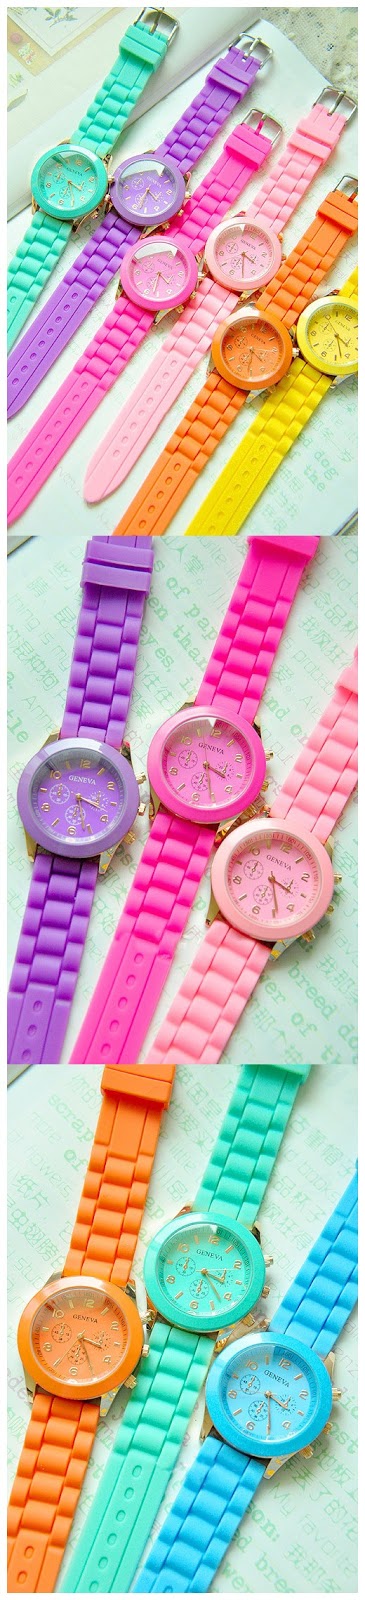 Lady Fluorescent Color Jelly Watch Ice Cream Silica Gel review